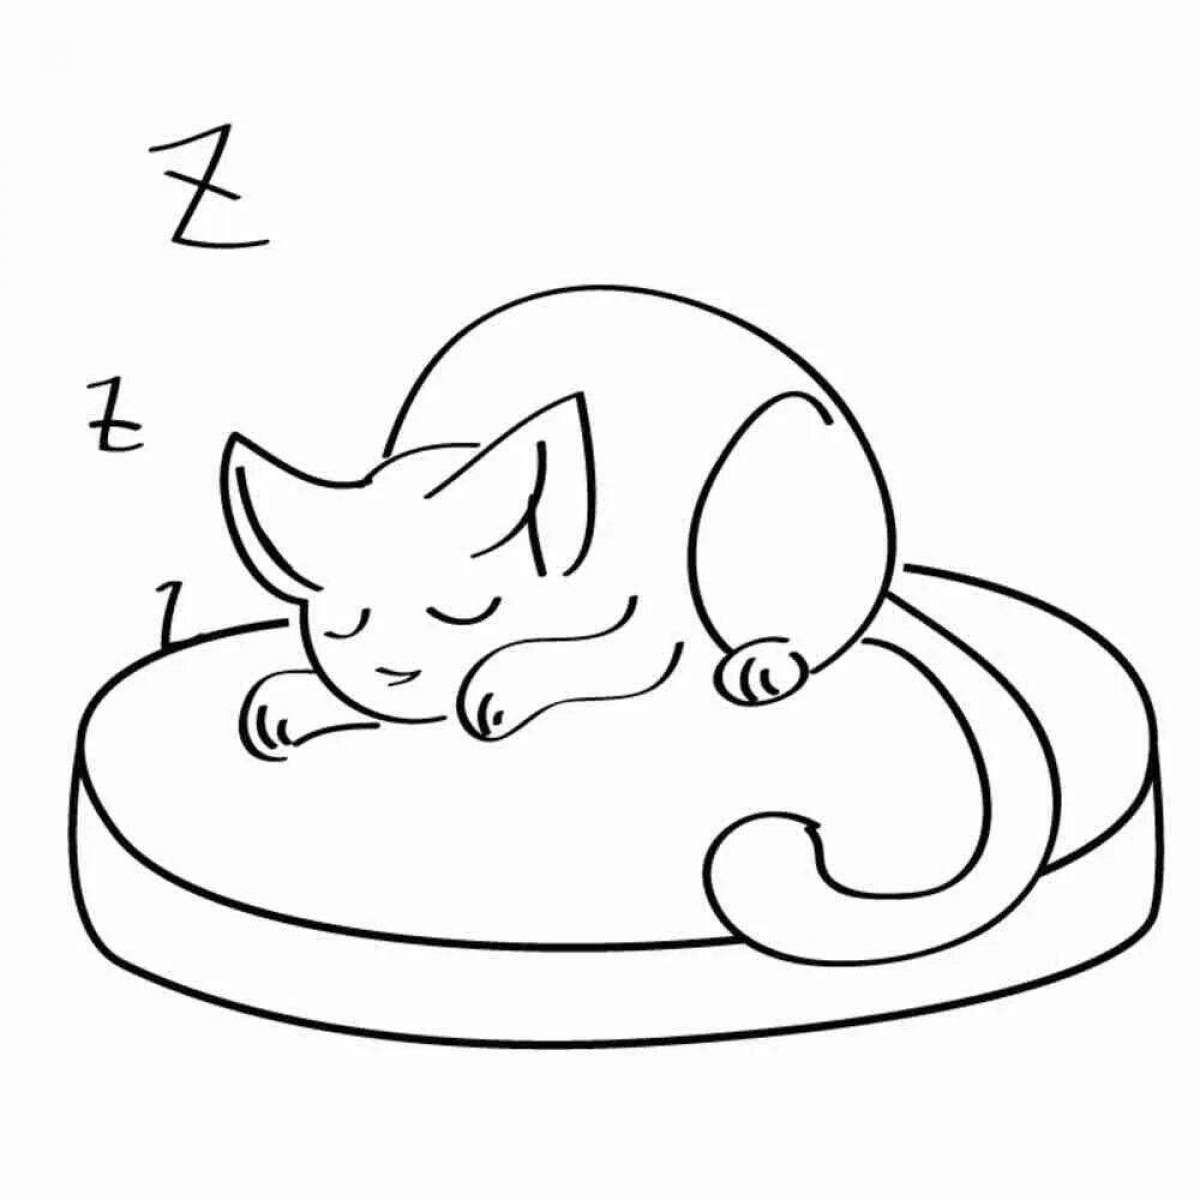 Coloring page cozy sleeping cat